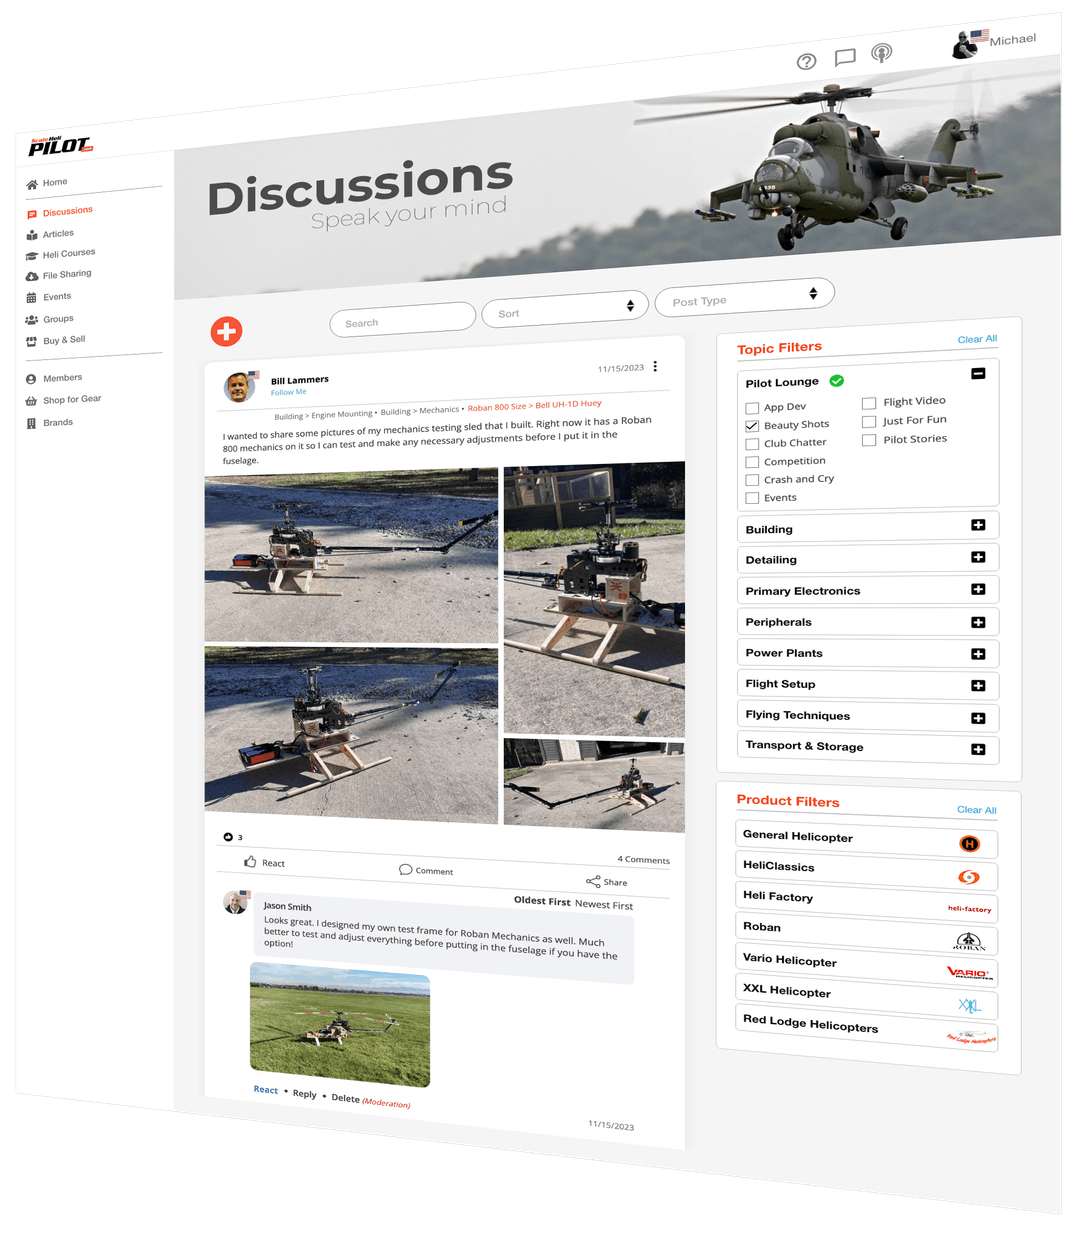 Discussions & topic filters